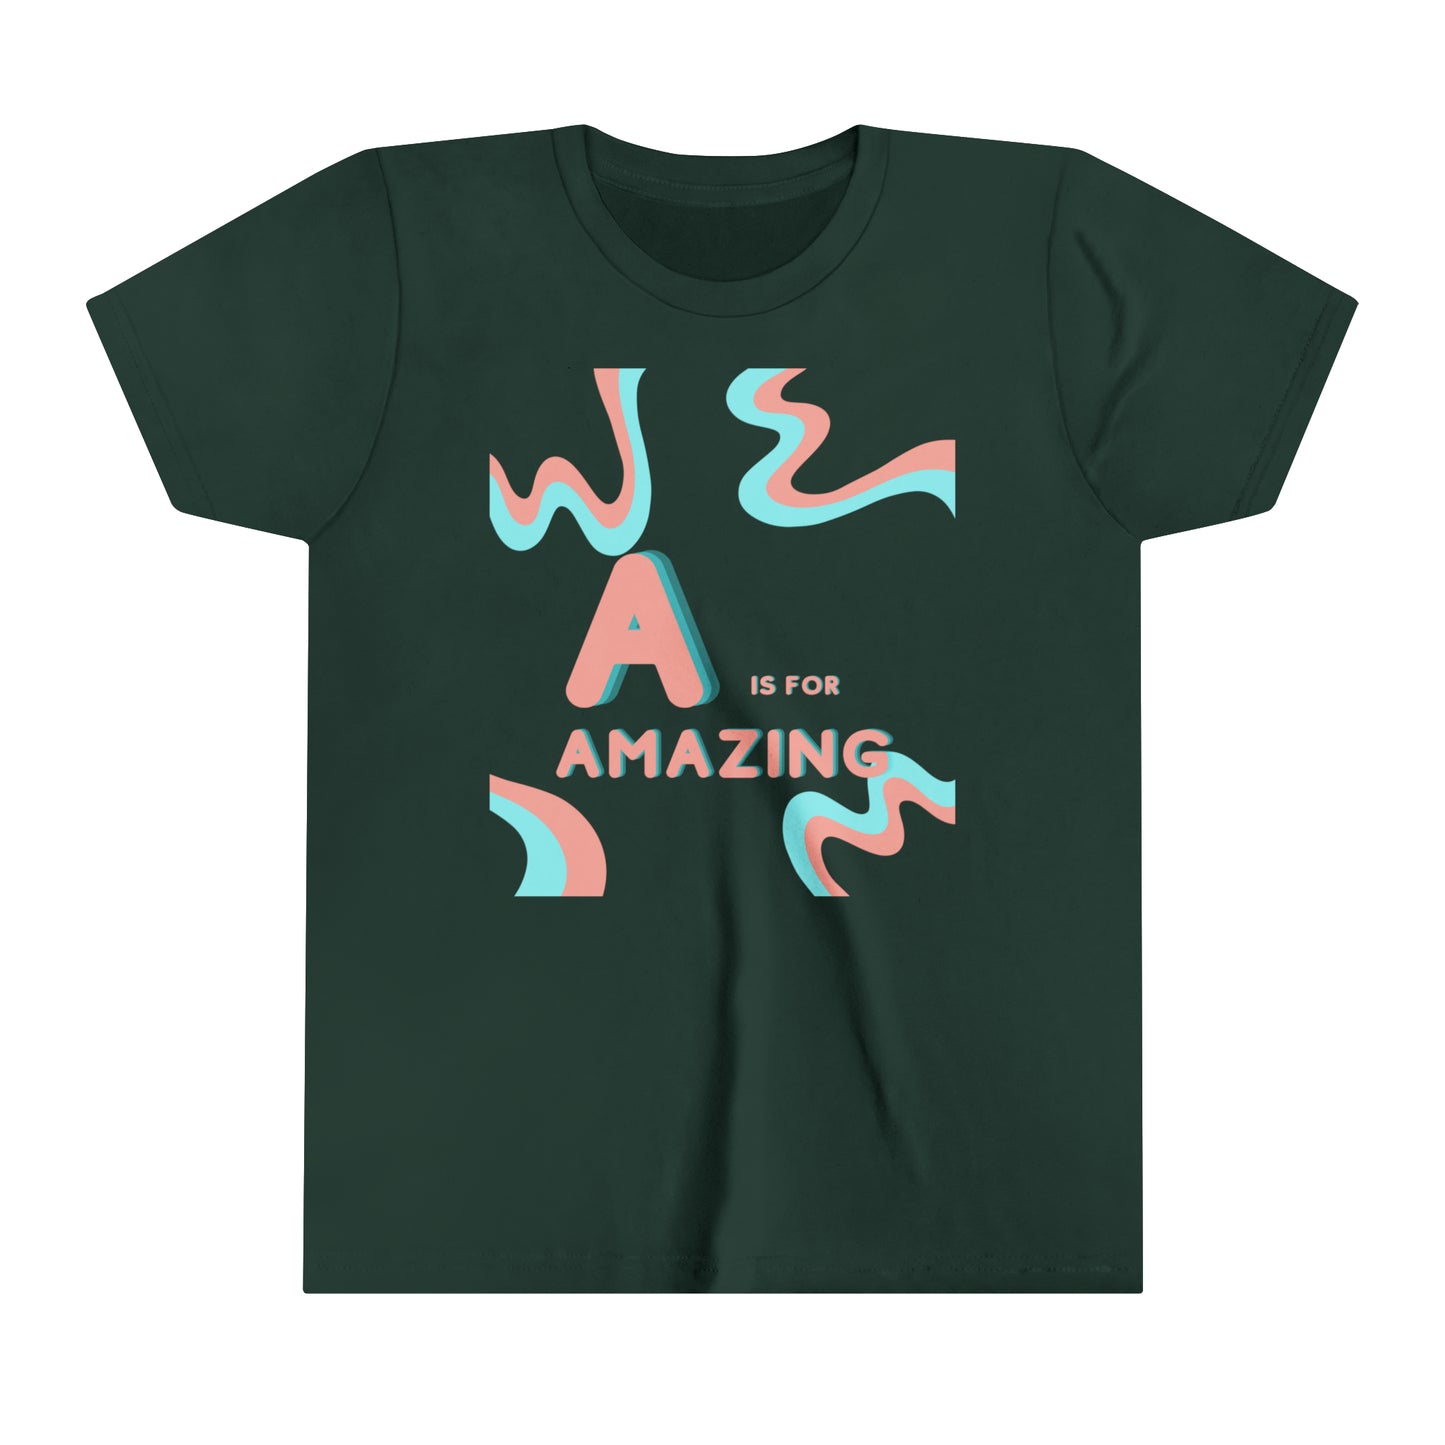 A is for Amazing shirt, Girl Short Sleeve Tee, Girls Tee, Girls Shirt, Gift for Daughters, gift for girls